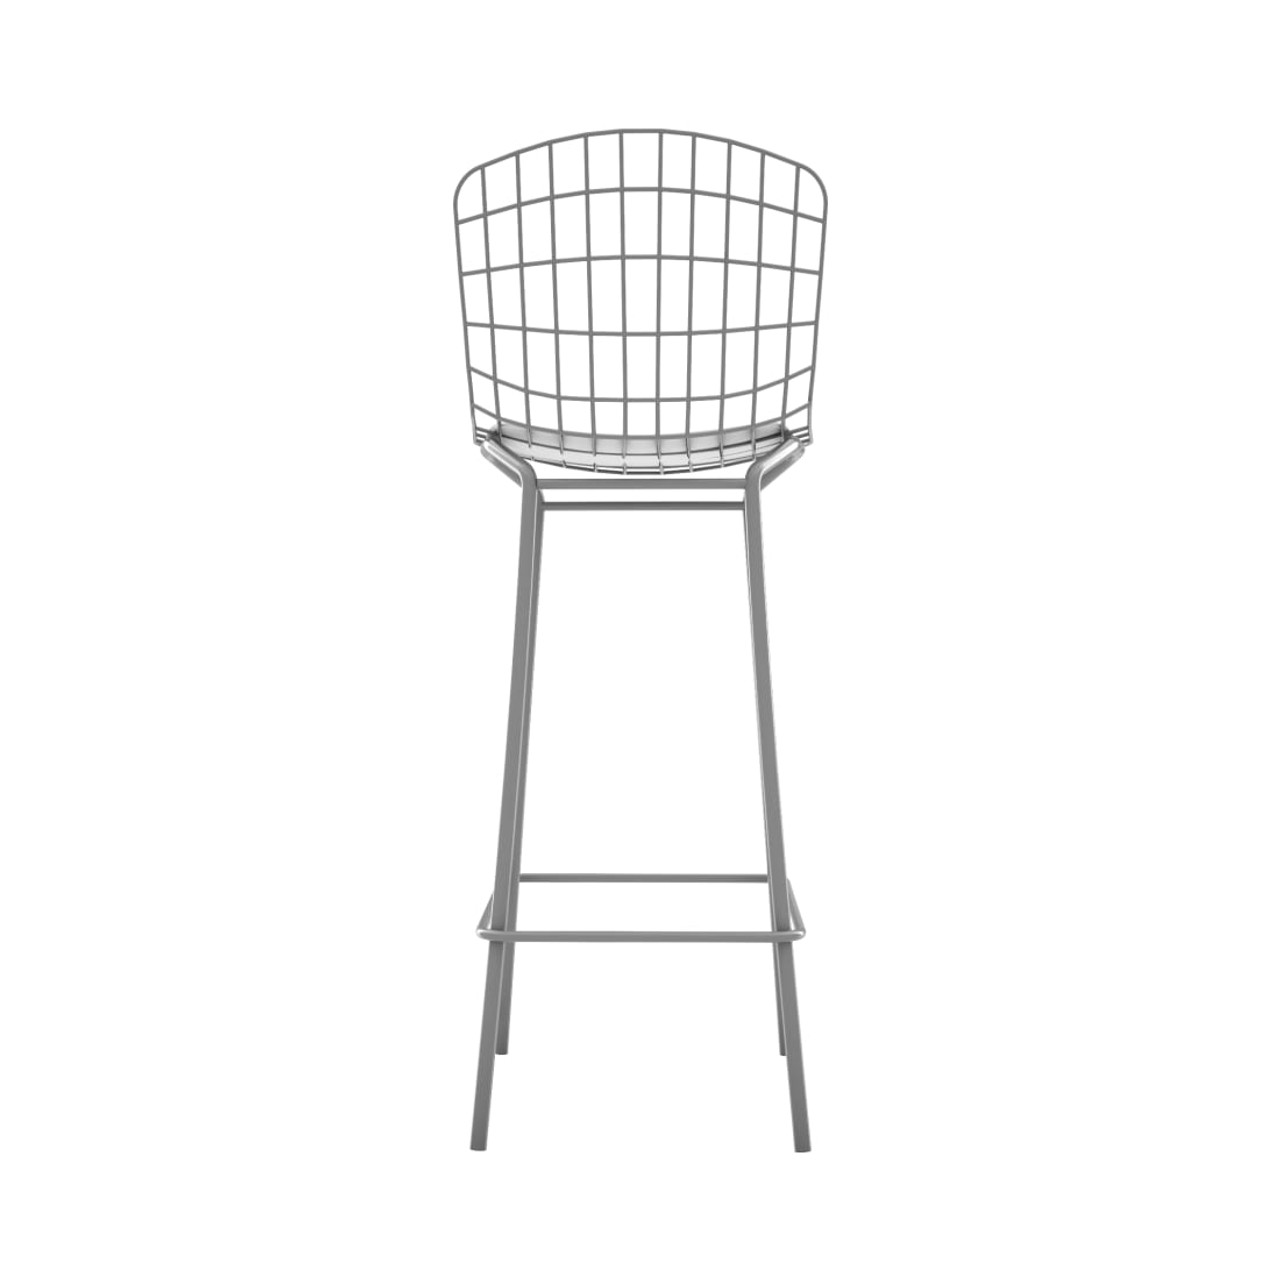 Madeline Barstool in Charcoal Gray and White (Set of 2)